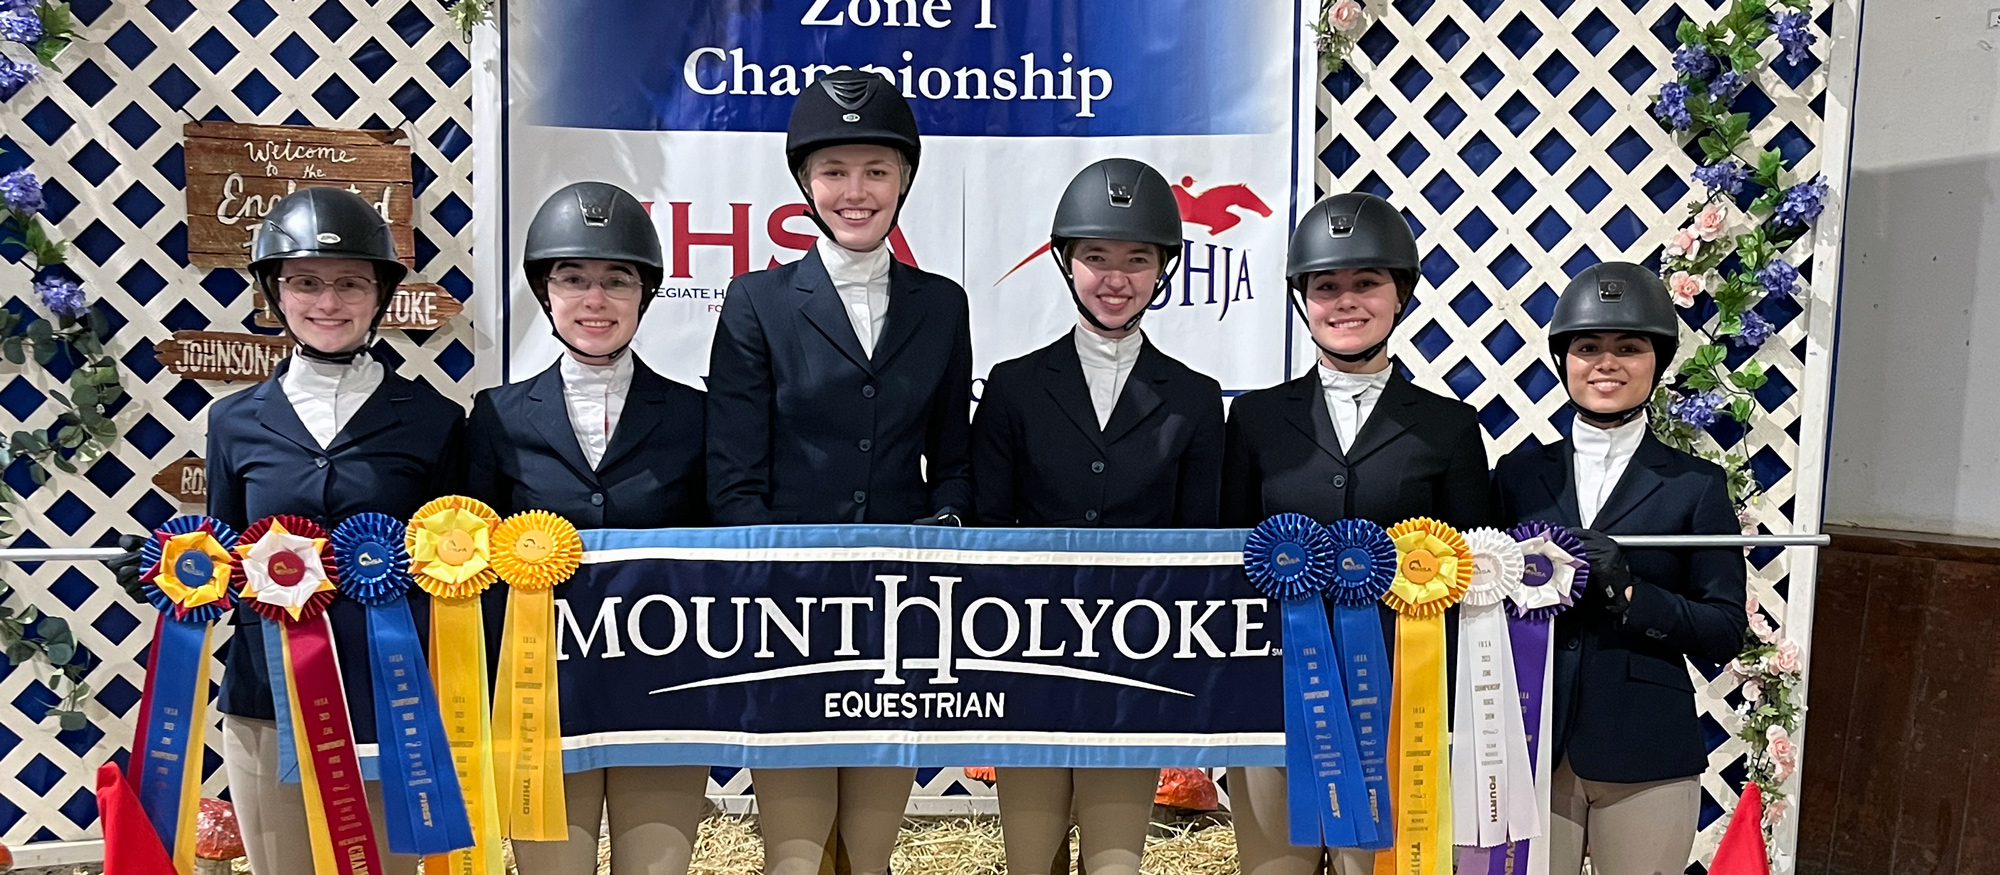 From left to right, Cate Bates, Johanna Sullivan, Chloe McElveen, Emmie Mirarchi, Madison Hurley, and Sunita Pearson-Siegel display their ribbons won on the first day of the IHSA Zone 1 Championships.